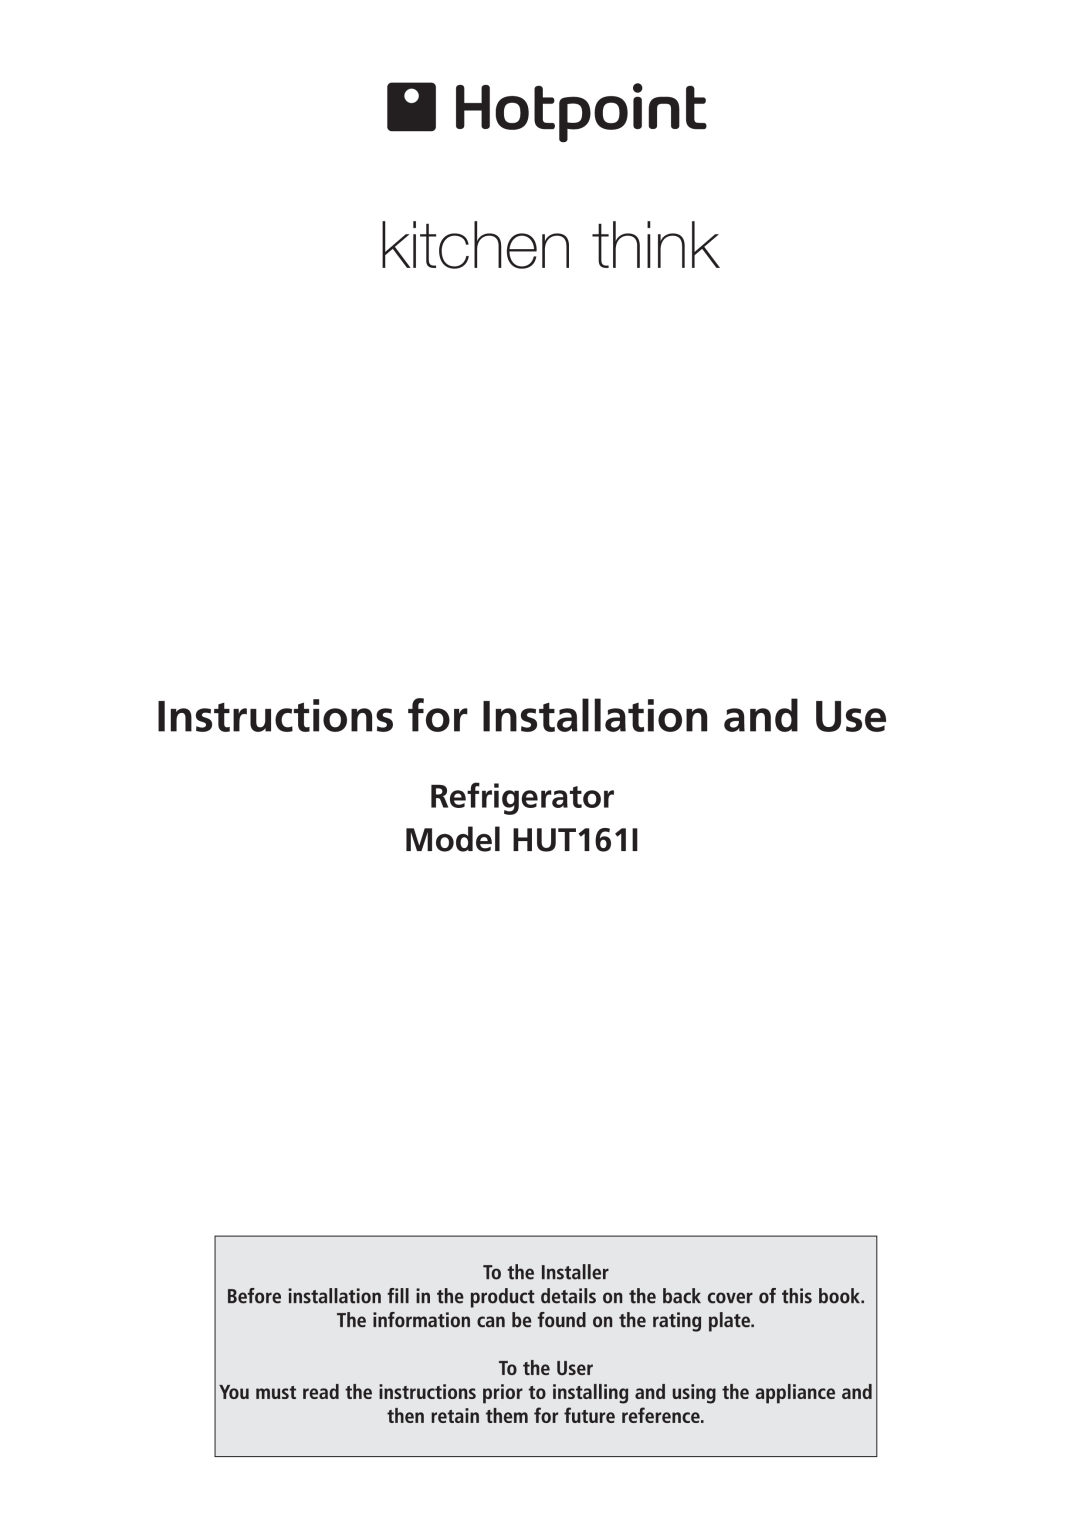 Hotpoint manual Refrigerator Model HUT161I, Instructions for Installation and Use 